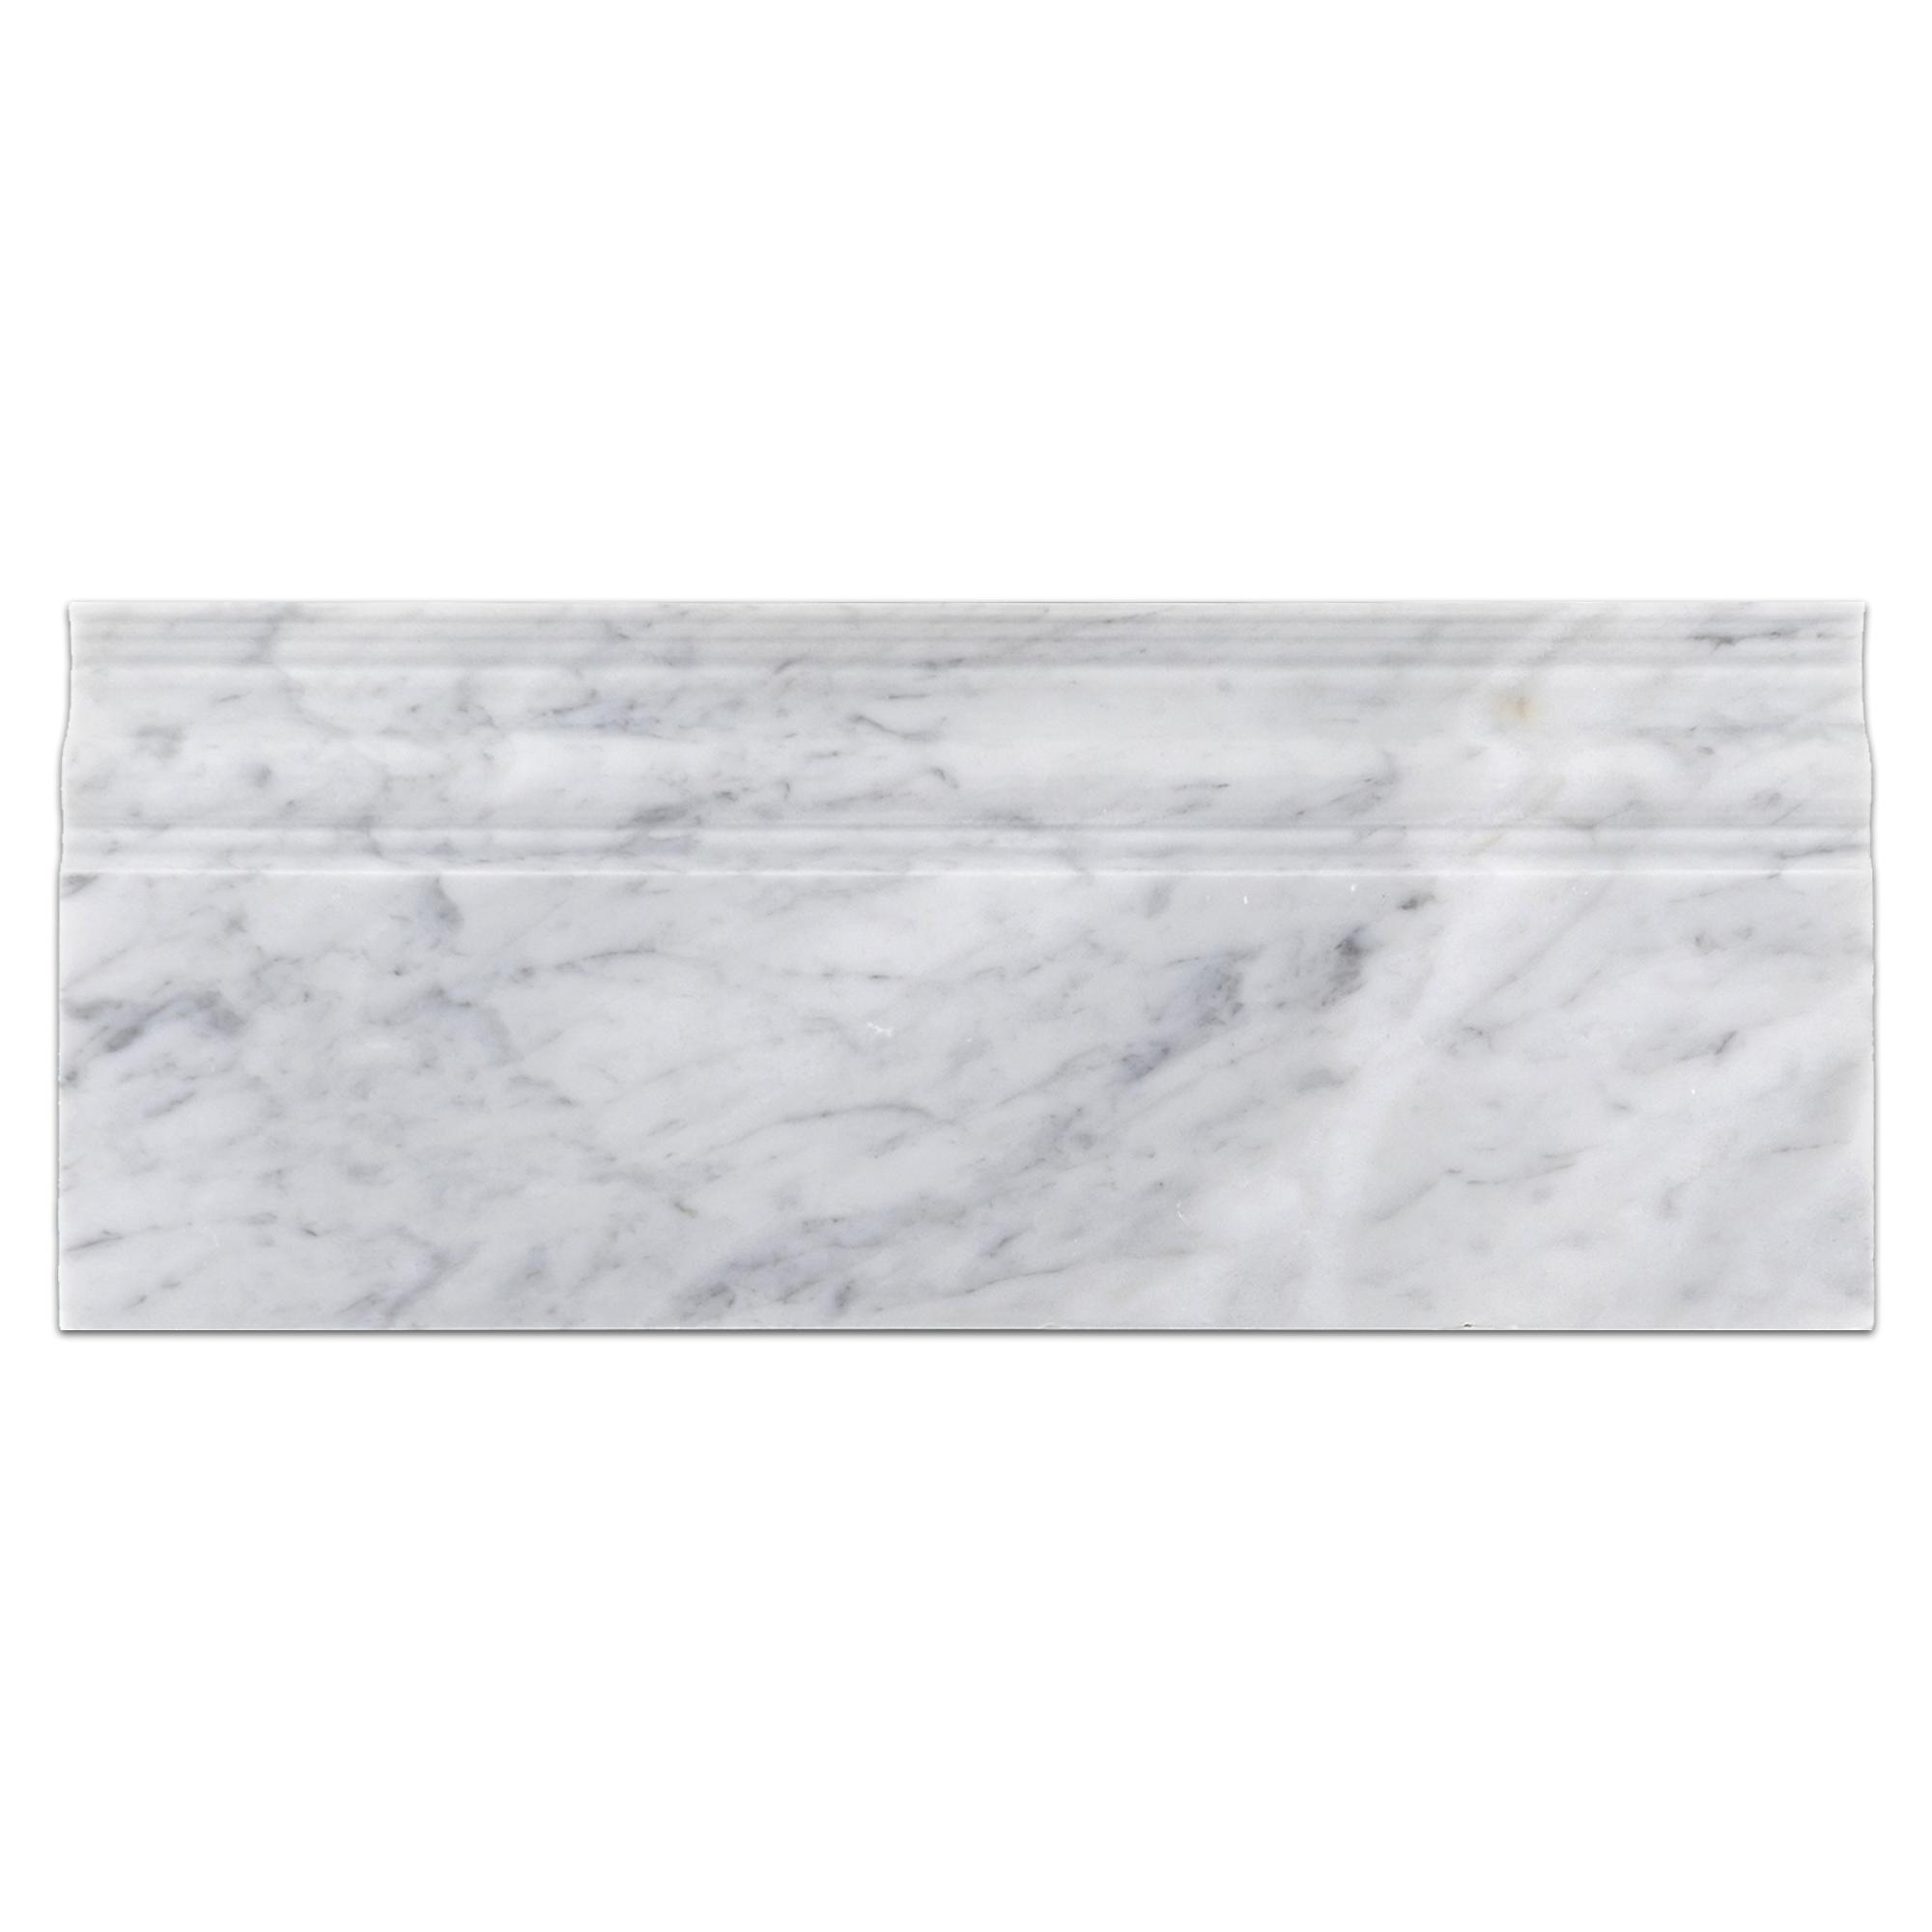 Elon Bianco Carrara honed marble baseboard tile 4.75x12 inches for elegant wall trim, available at Surface Group.